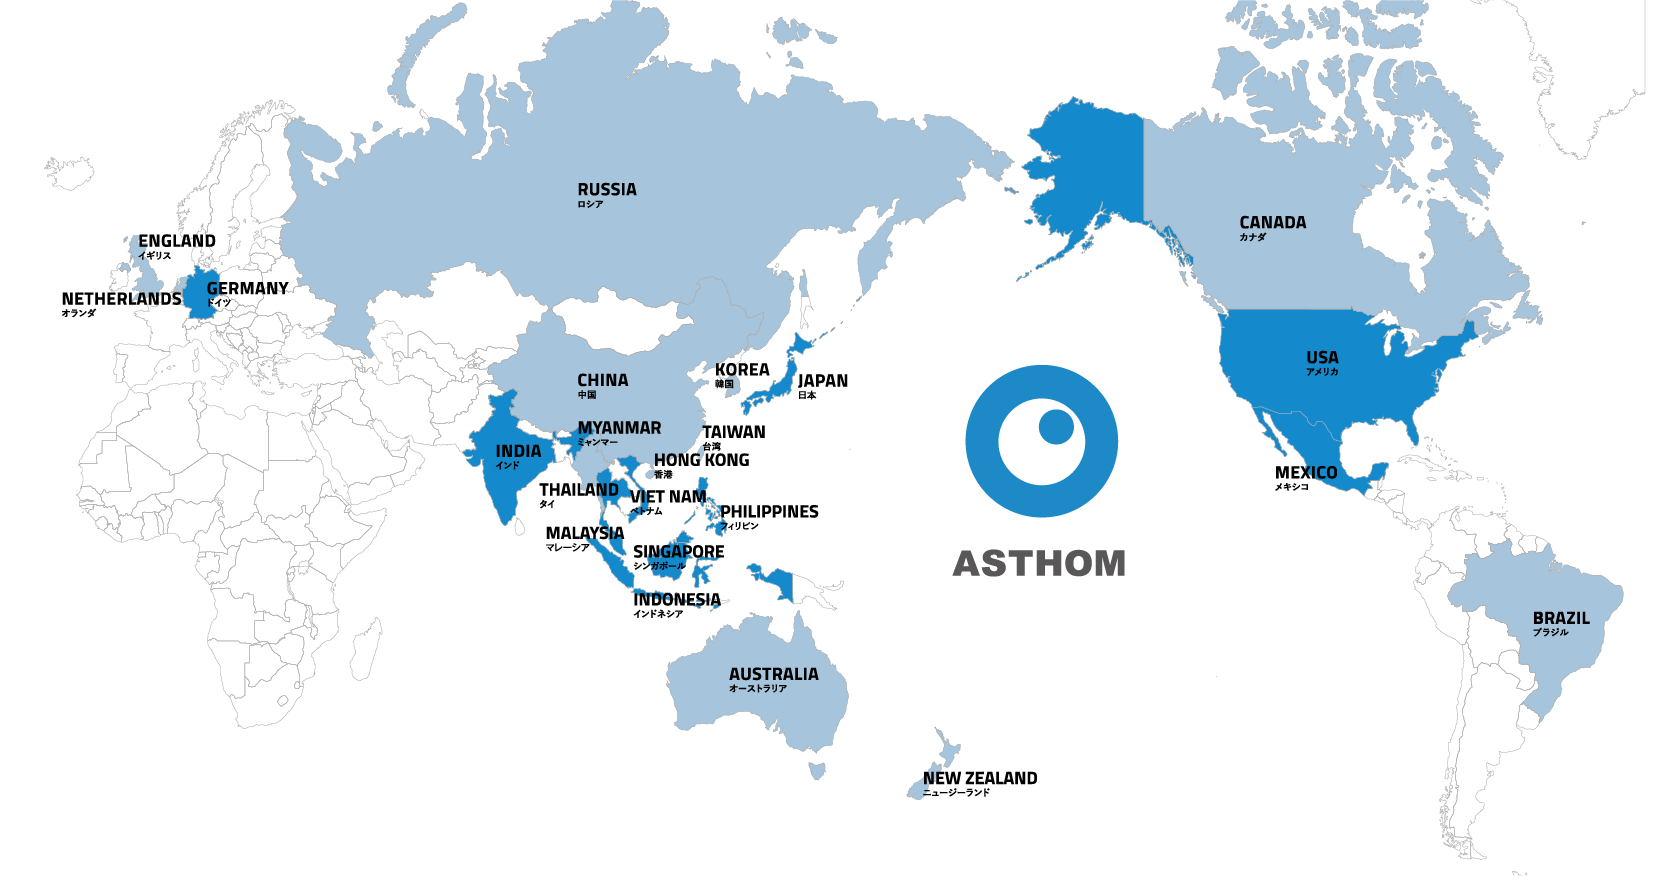 AGS Global Network